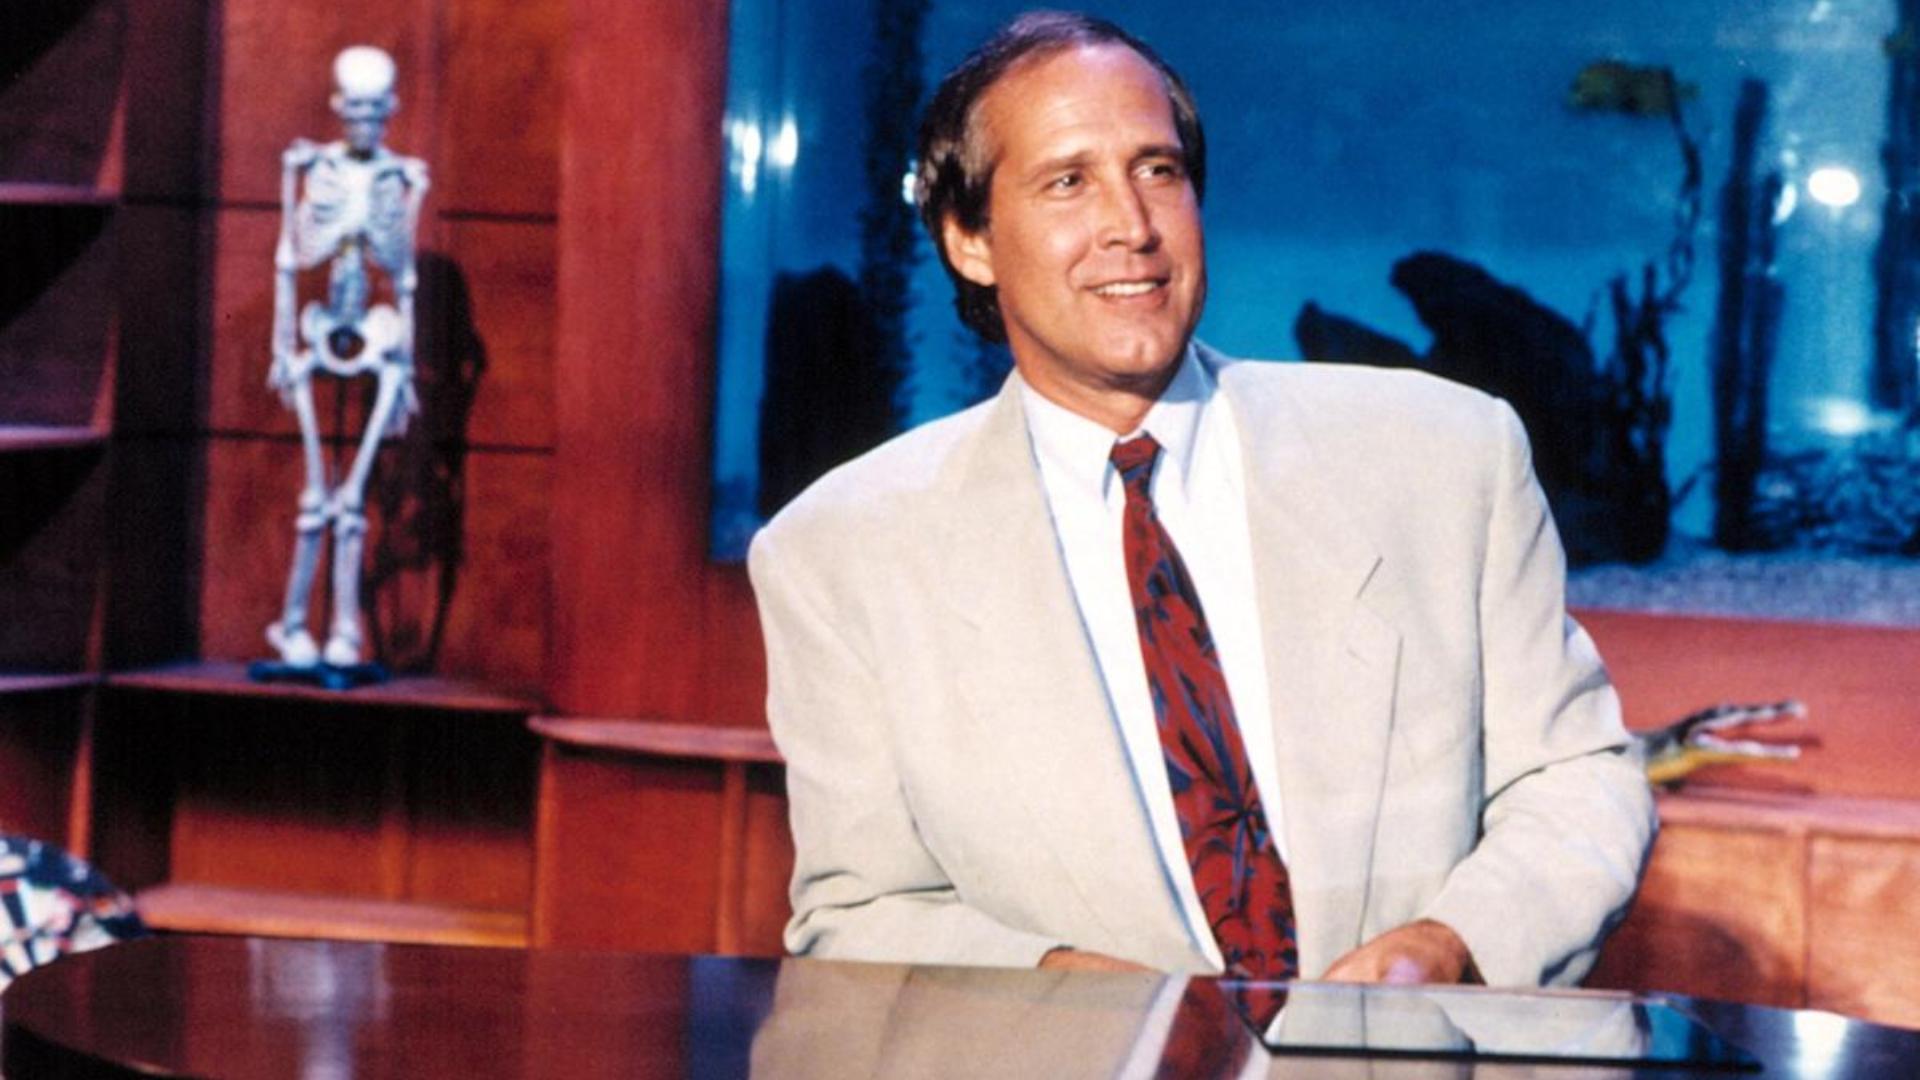 The Chevy Chase Show epic TV shows